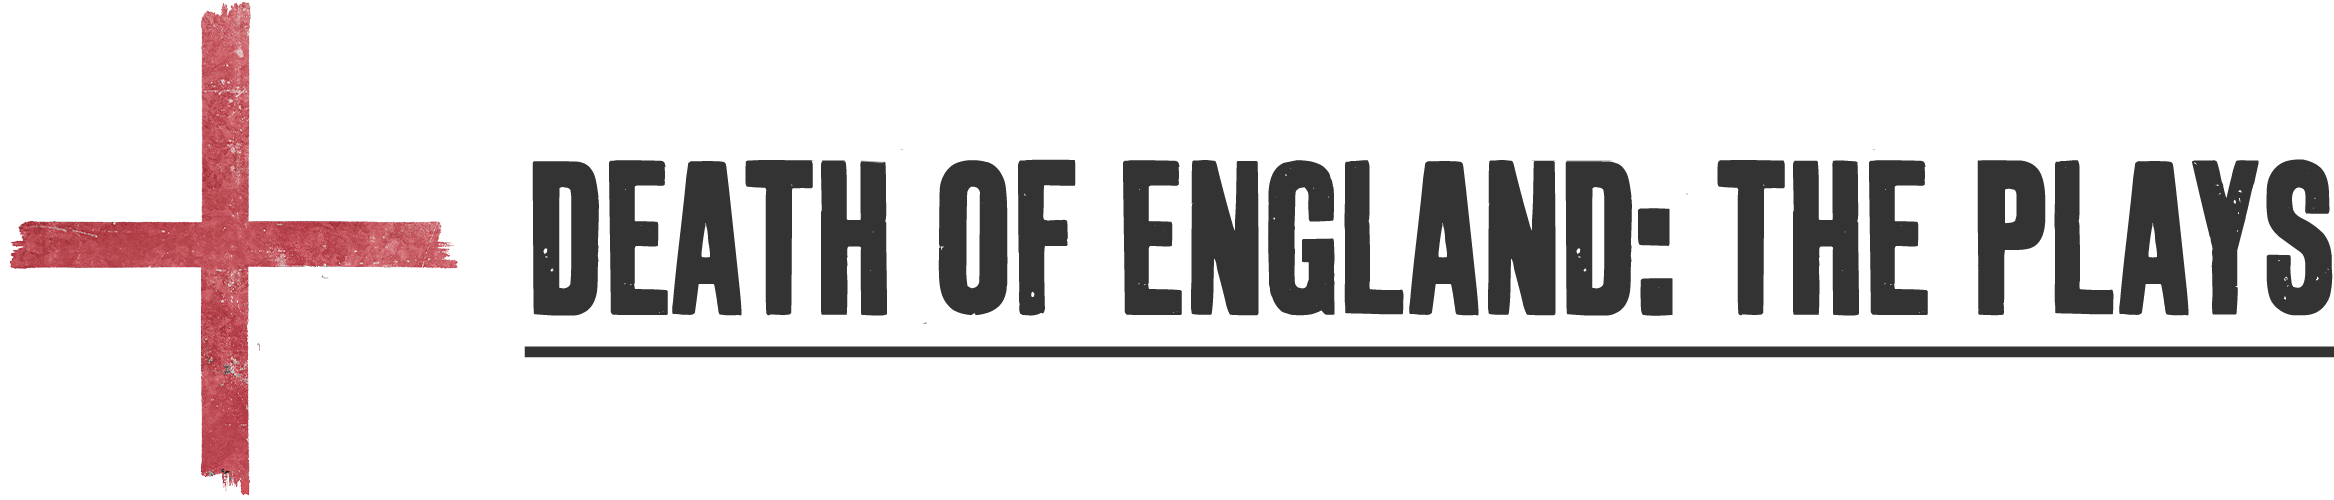 Death Of England: The Plays